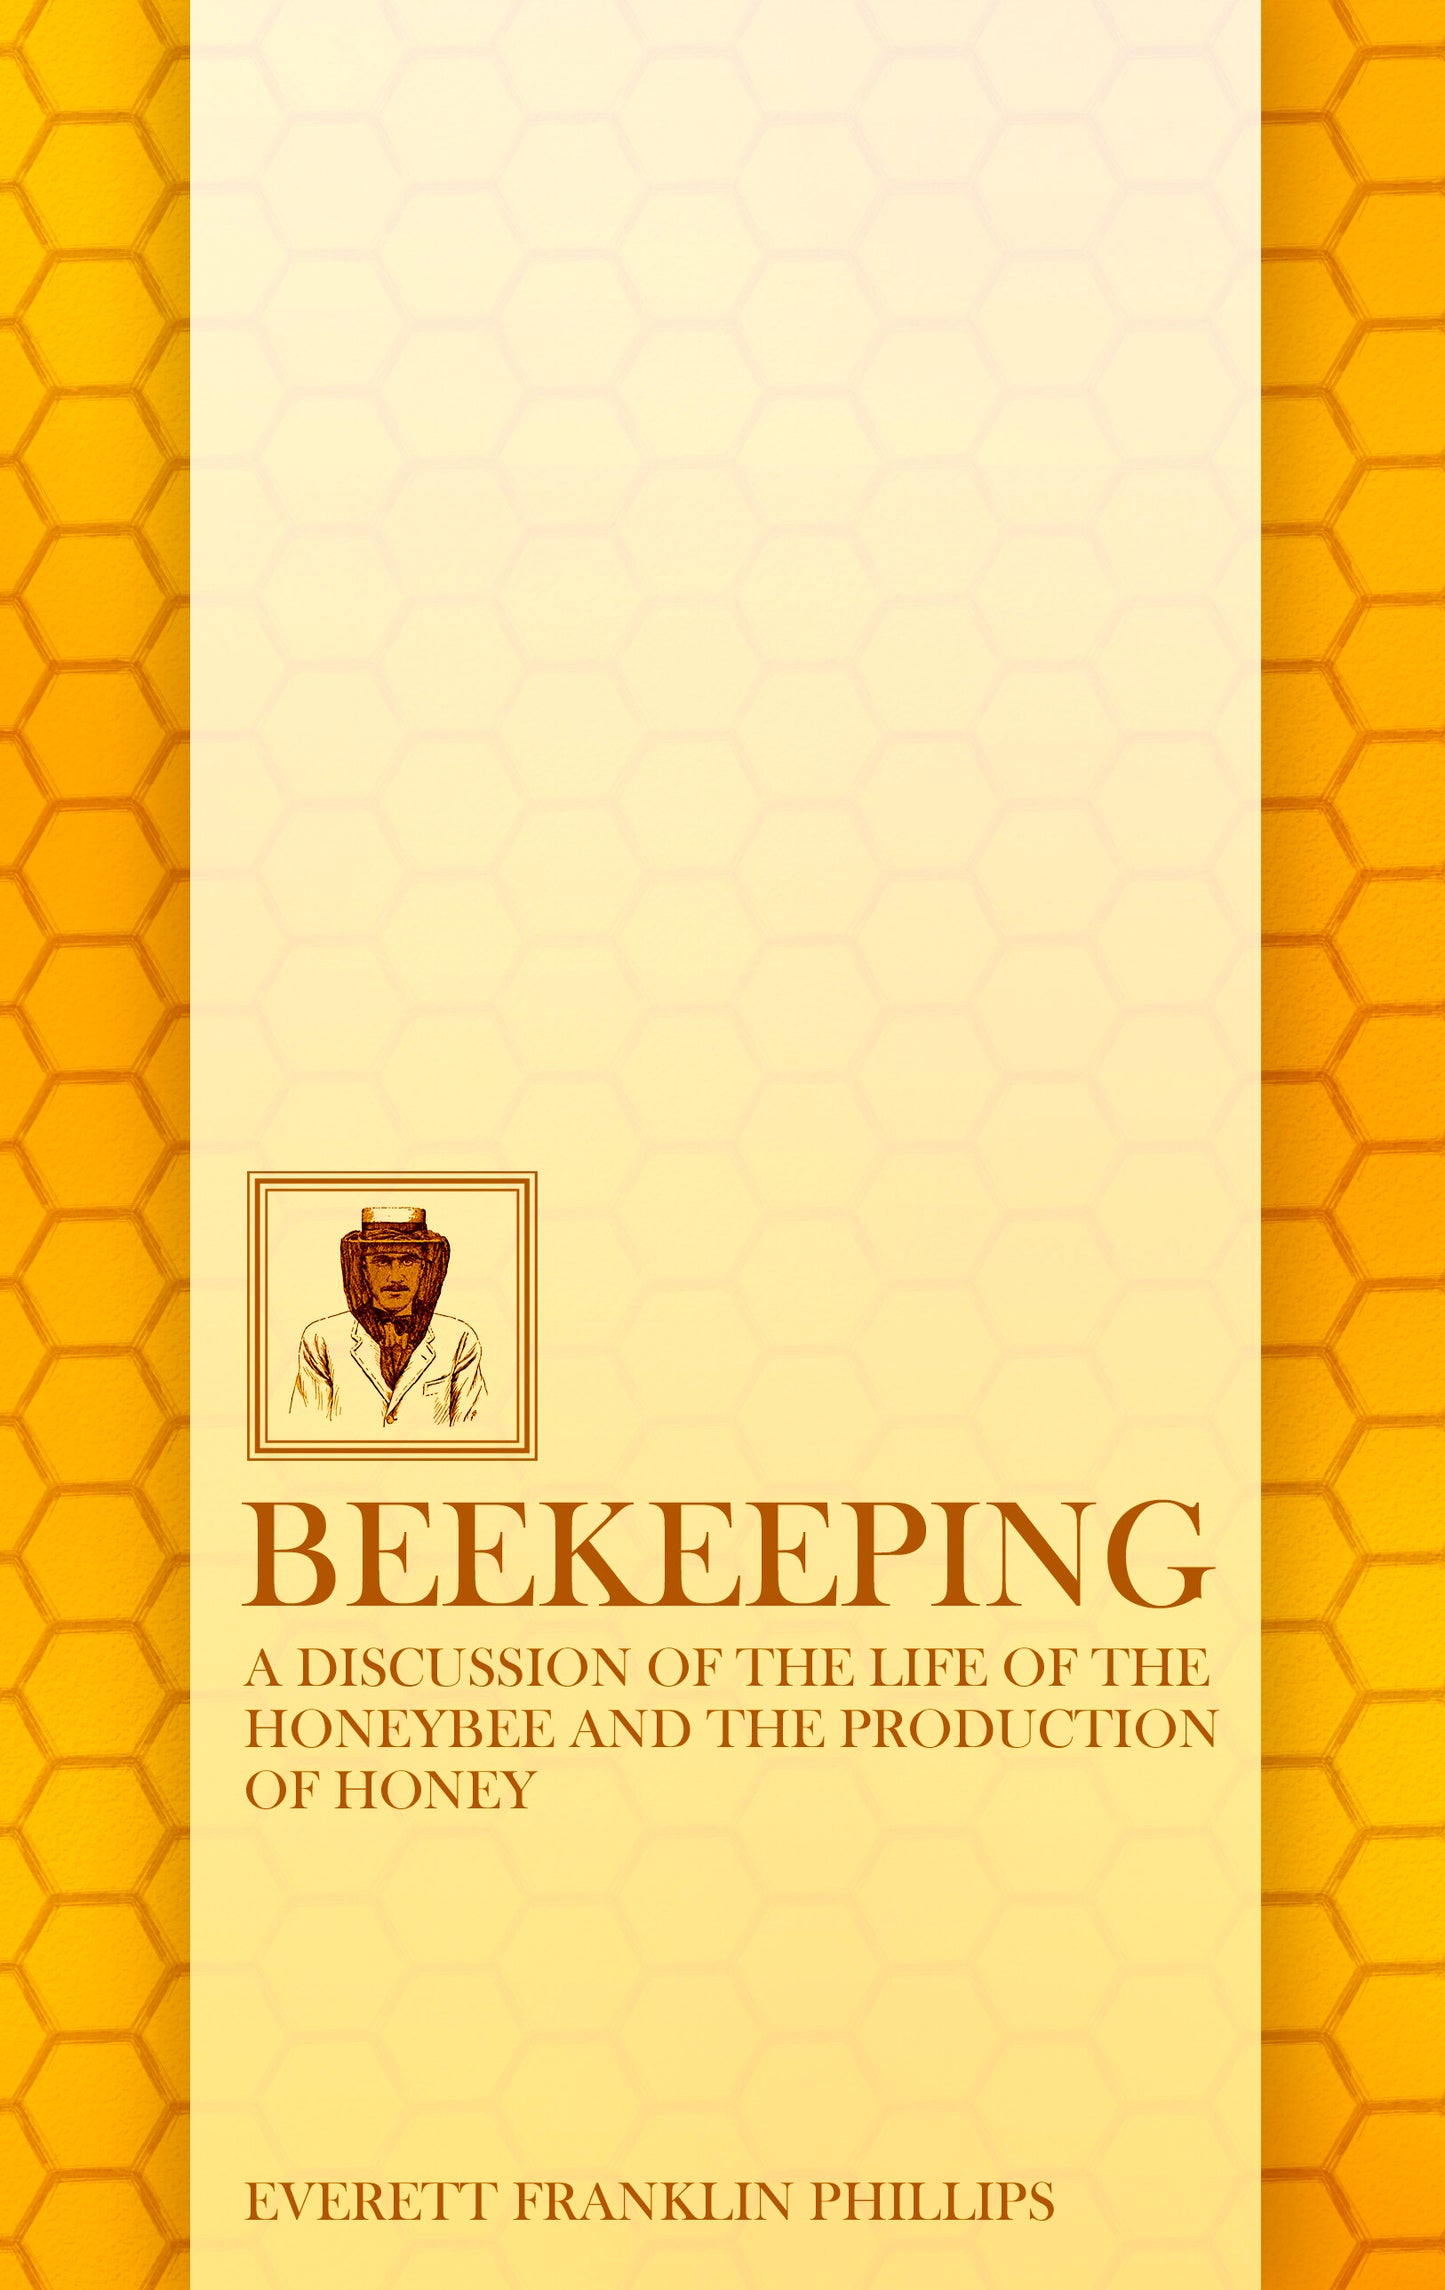 Beekeeping: A Discussion of the Life of the Honeybee and of the Production of Honey